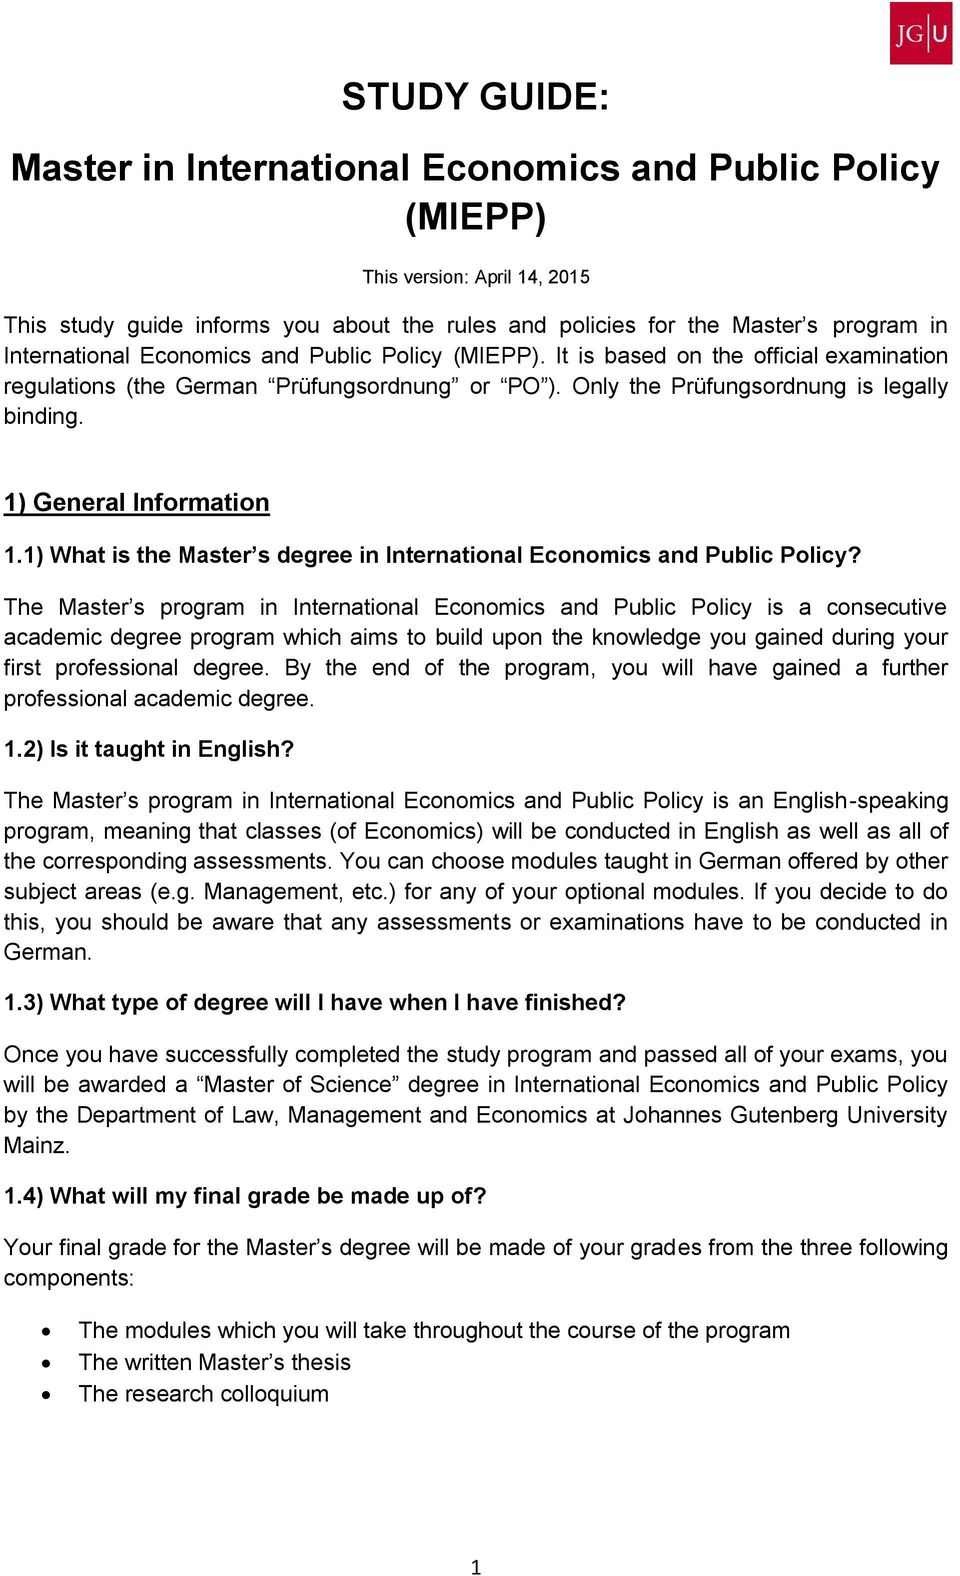 1) General Information 1.1) What is the Master s degree in International Economics and Public Policy?